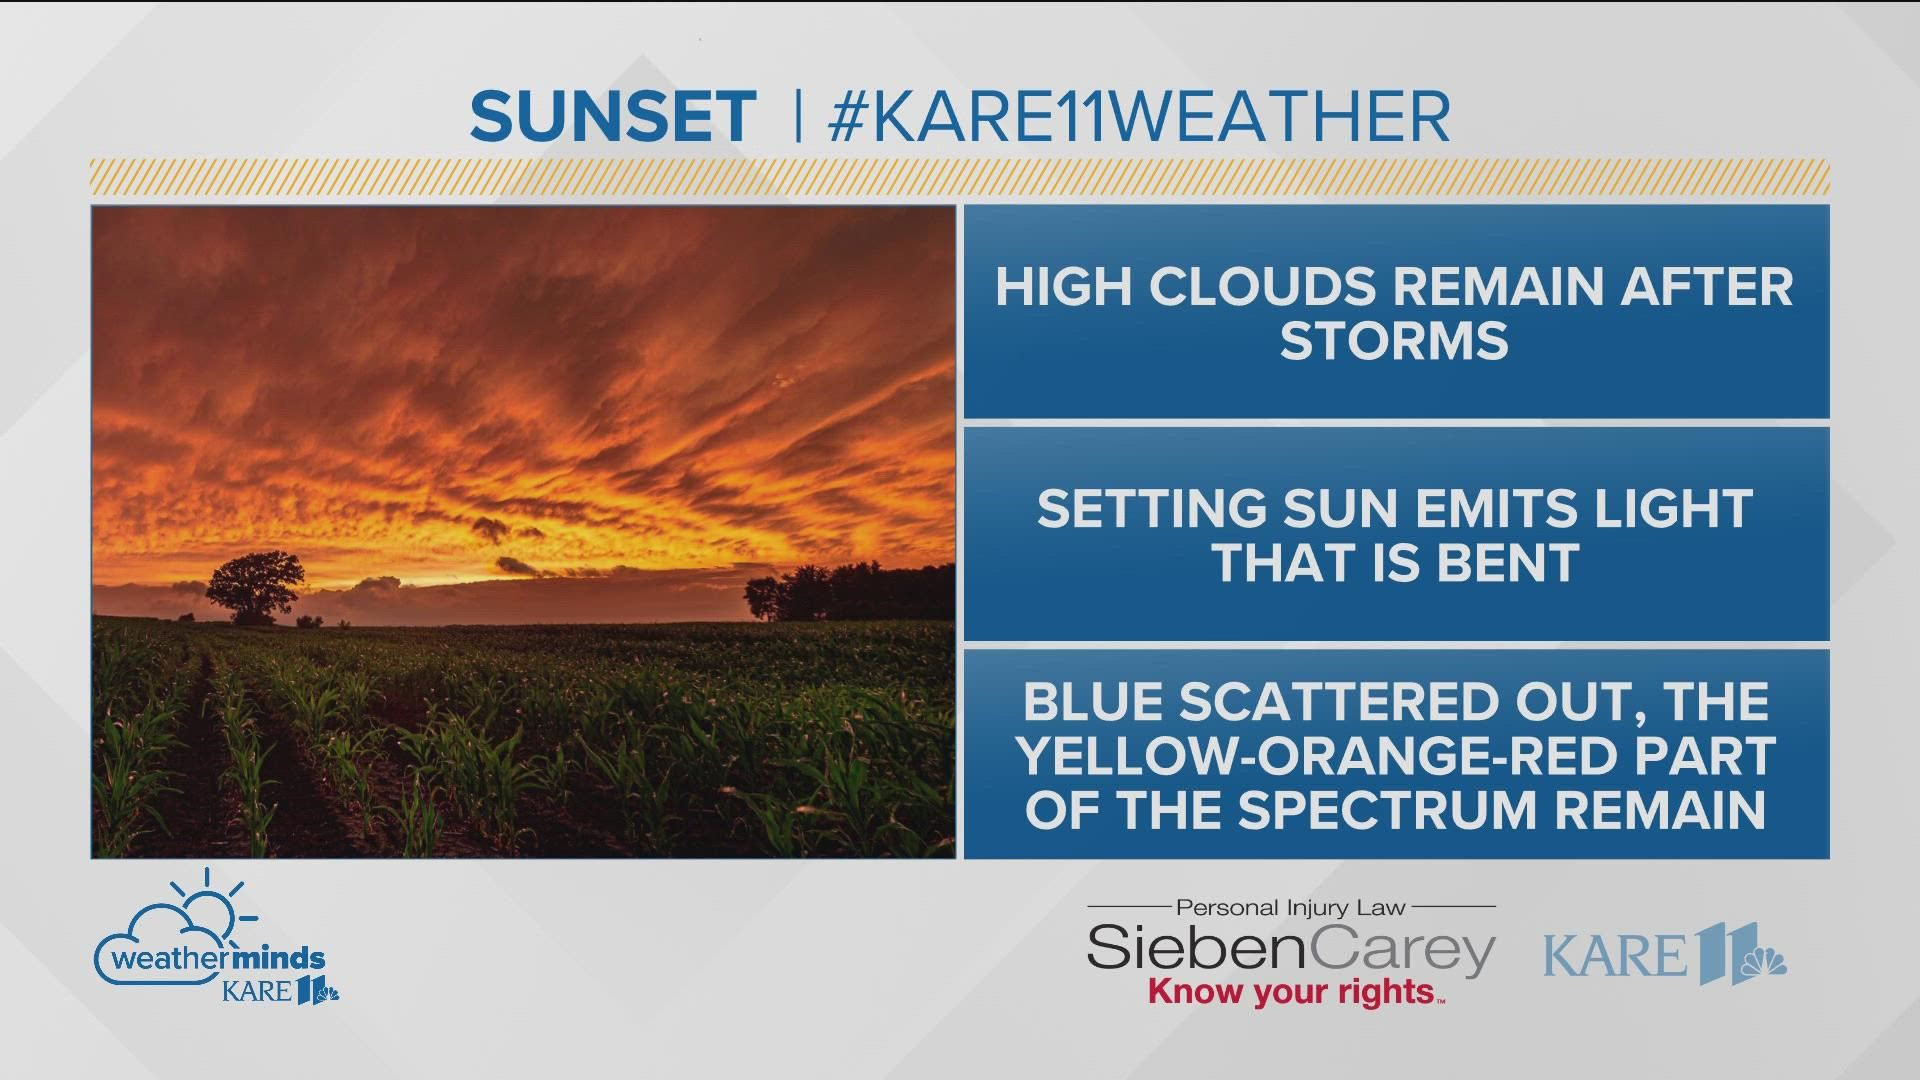 Guy Brown breaks down the weather science behind the sky's golden hue.